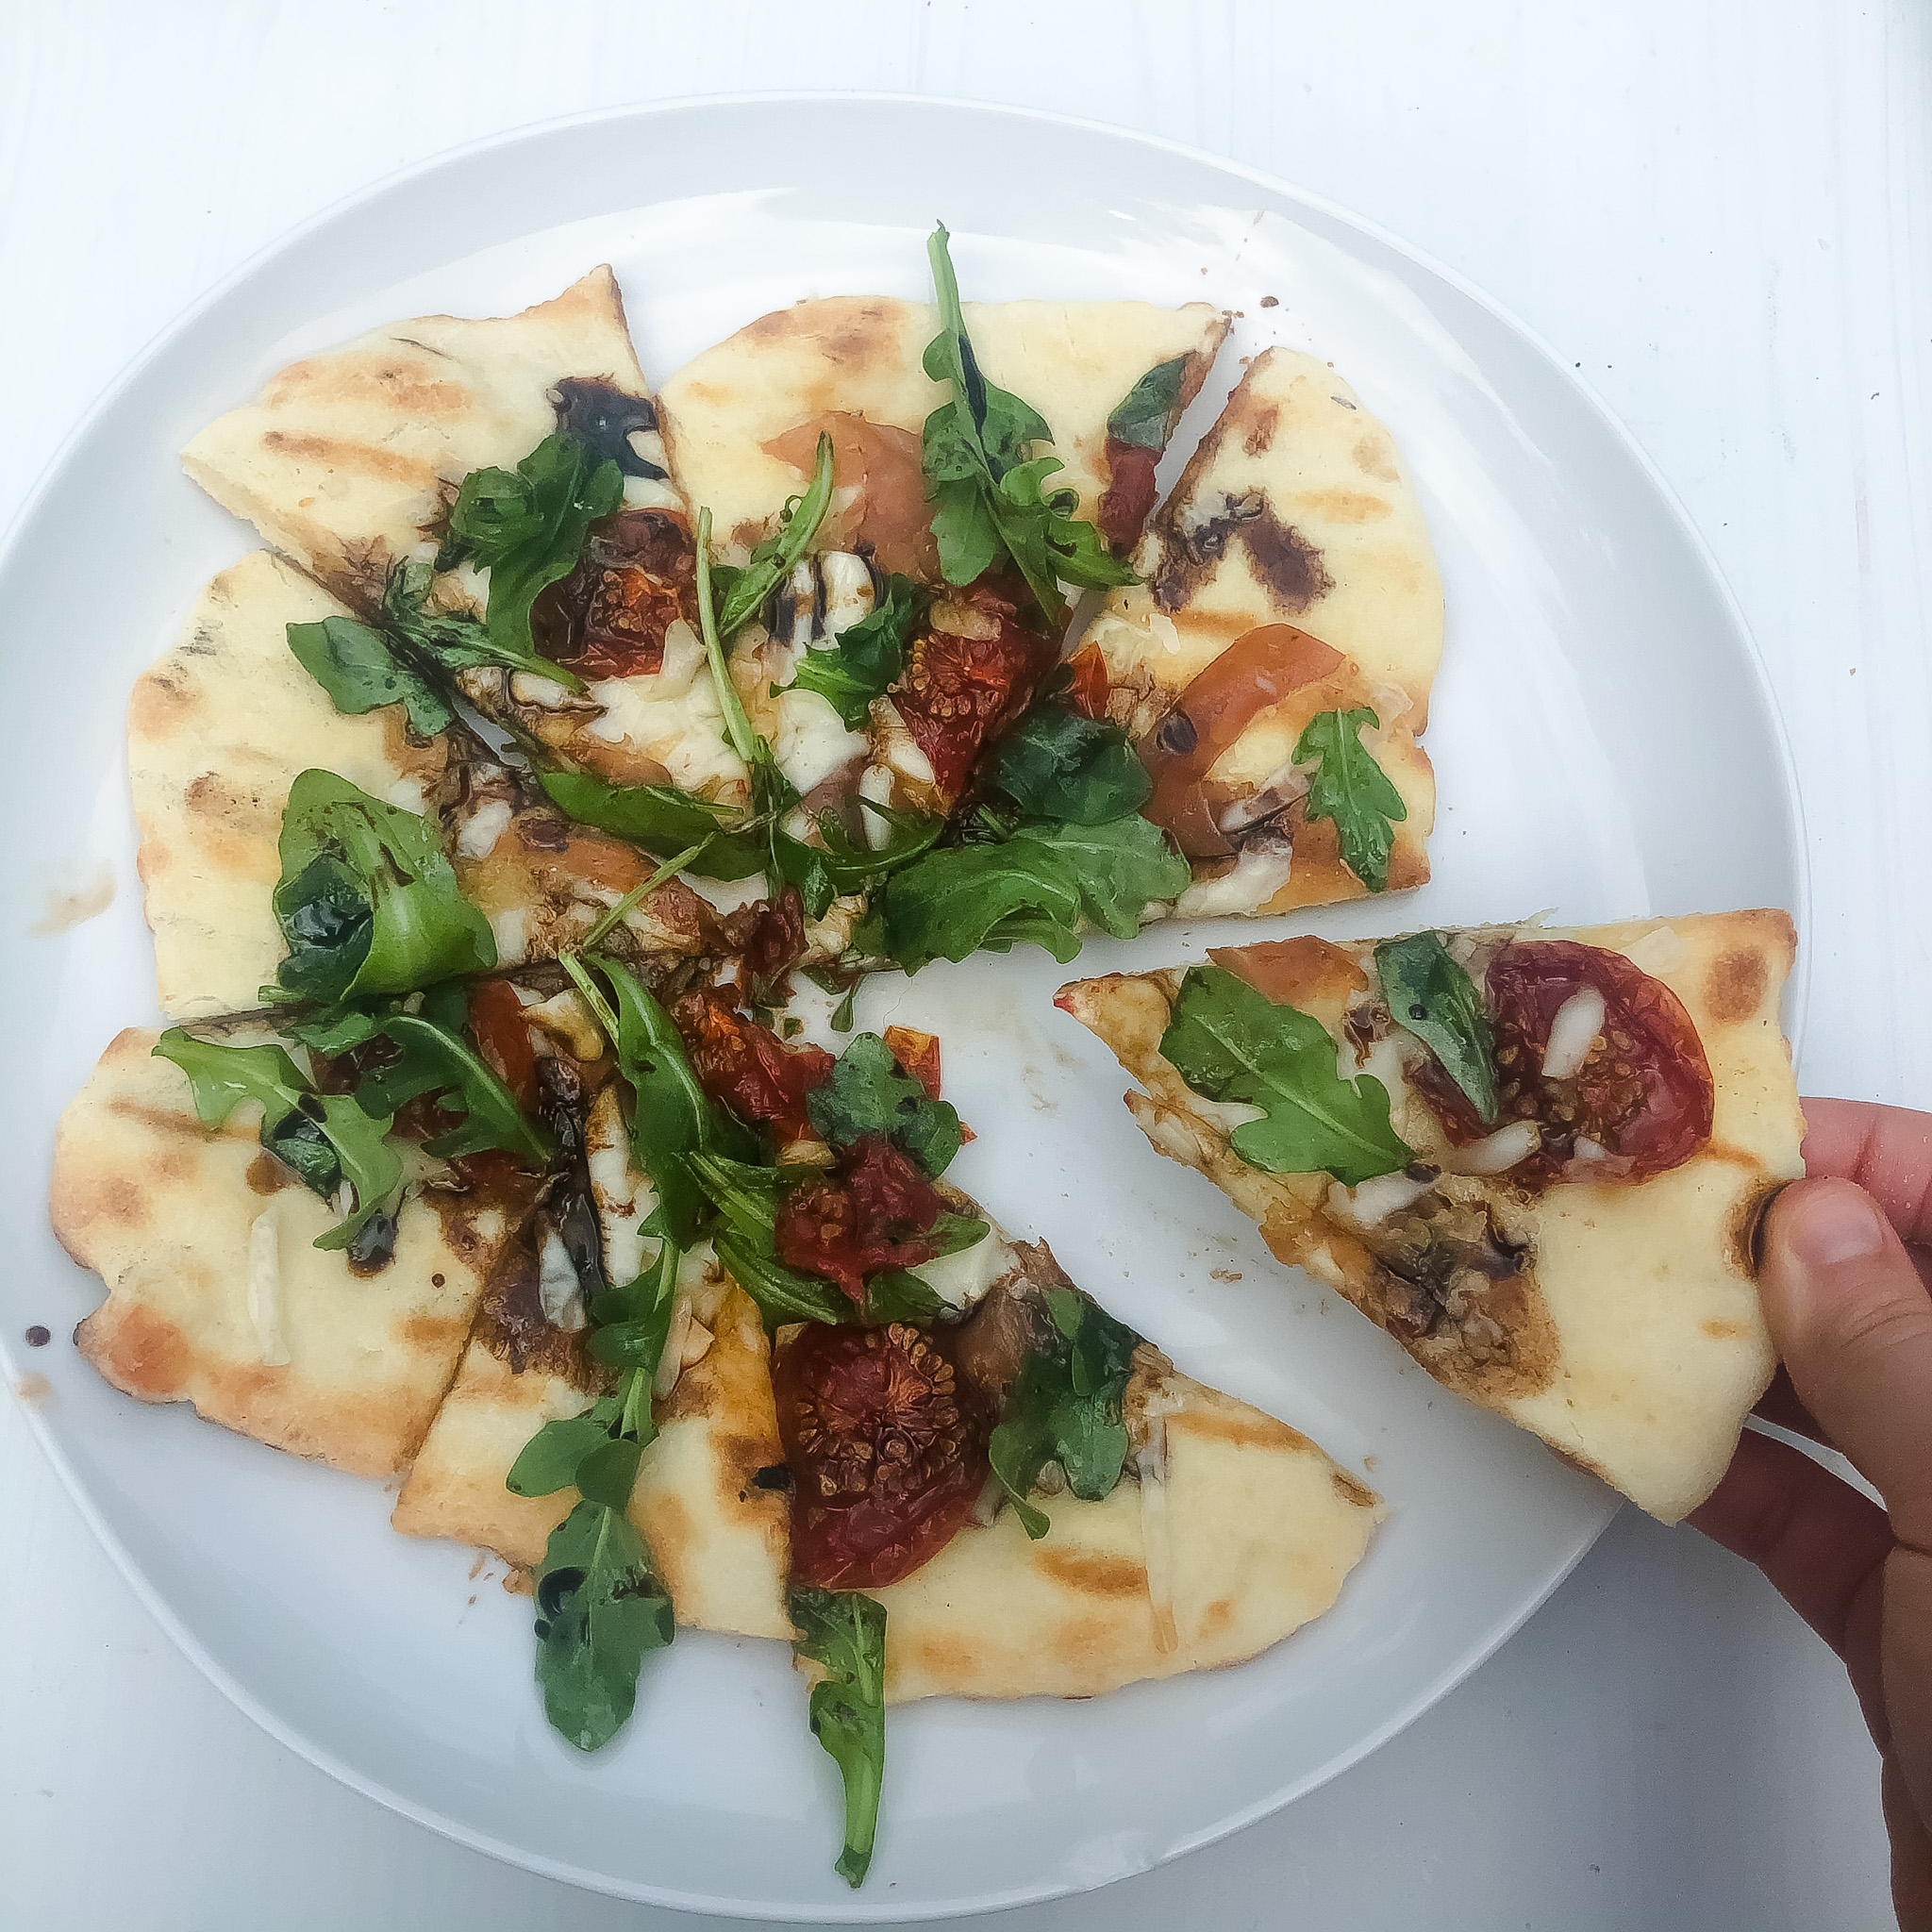 finished gluten free grilled flatbread with arugula and roasted tomatoes